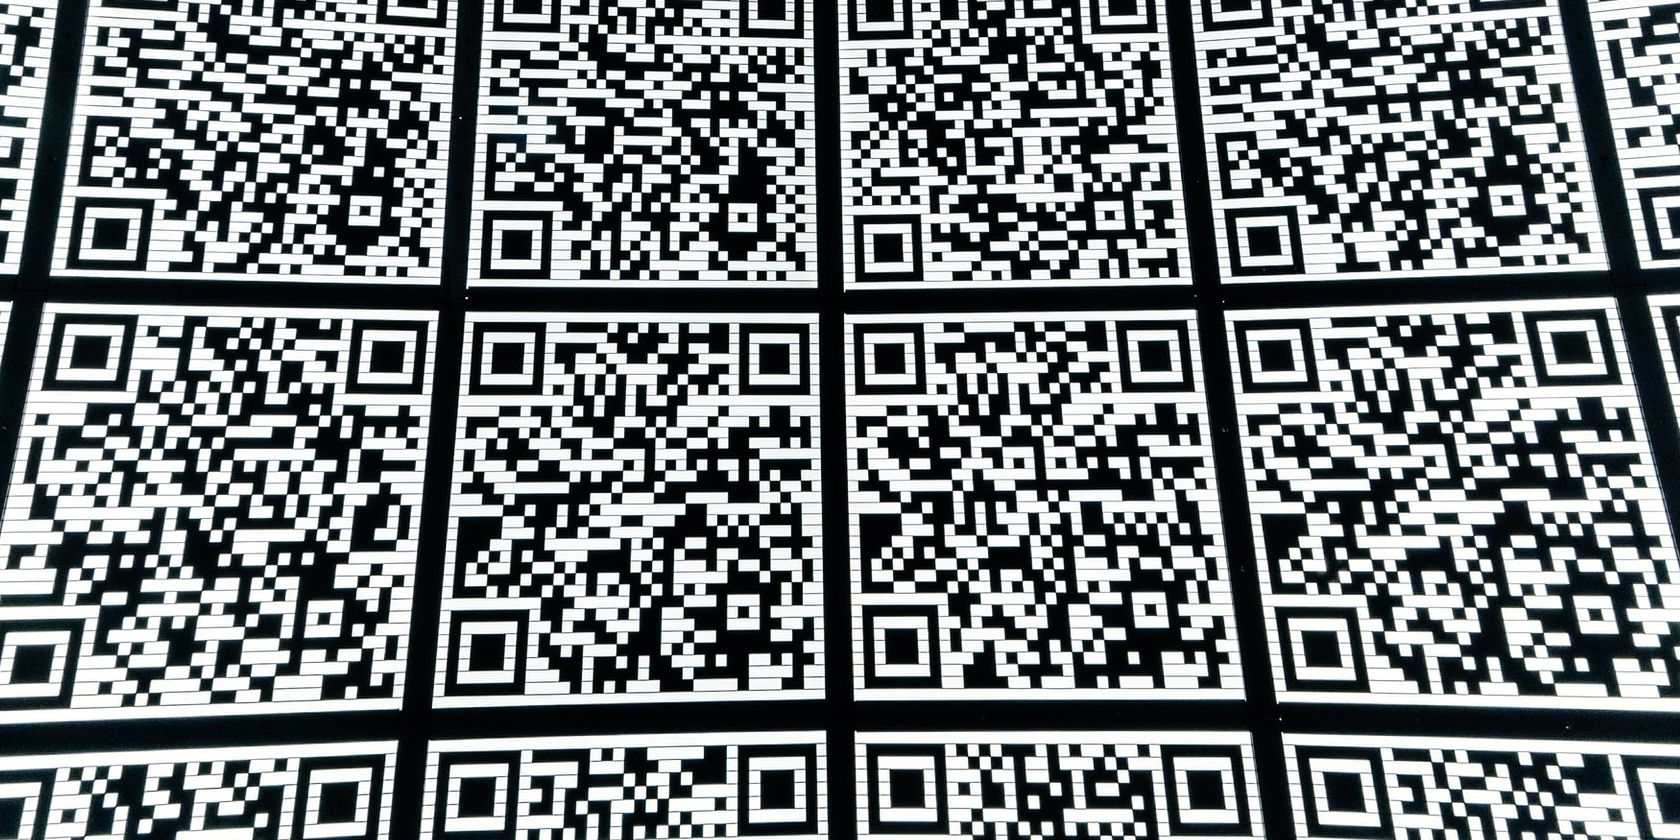 What Is a QR Code and How Do You 3D Print One?